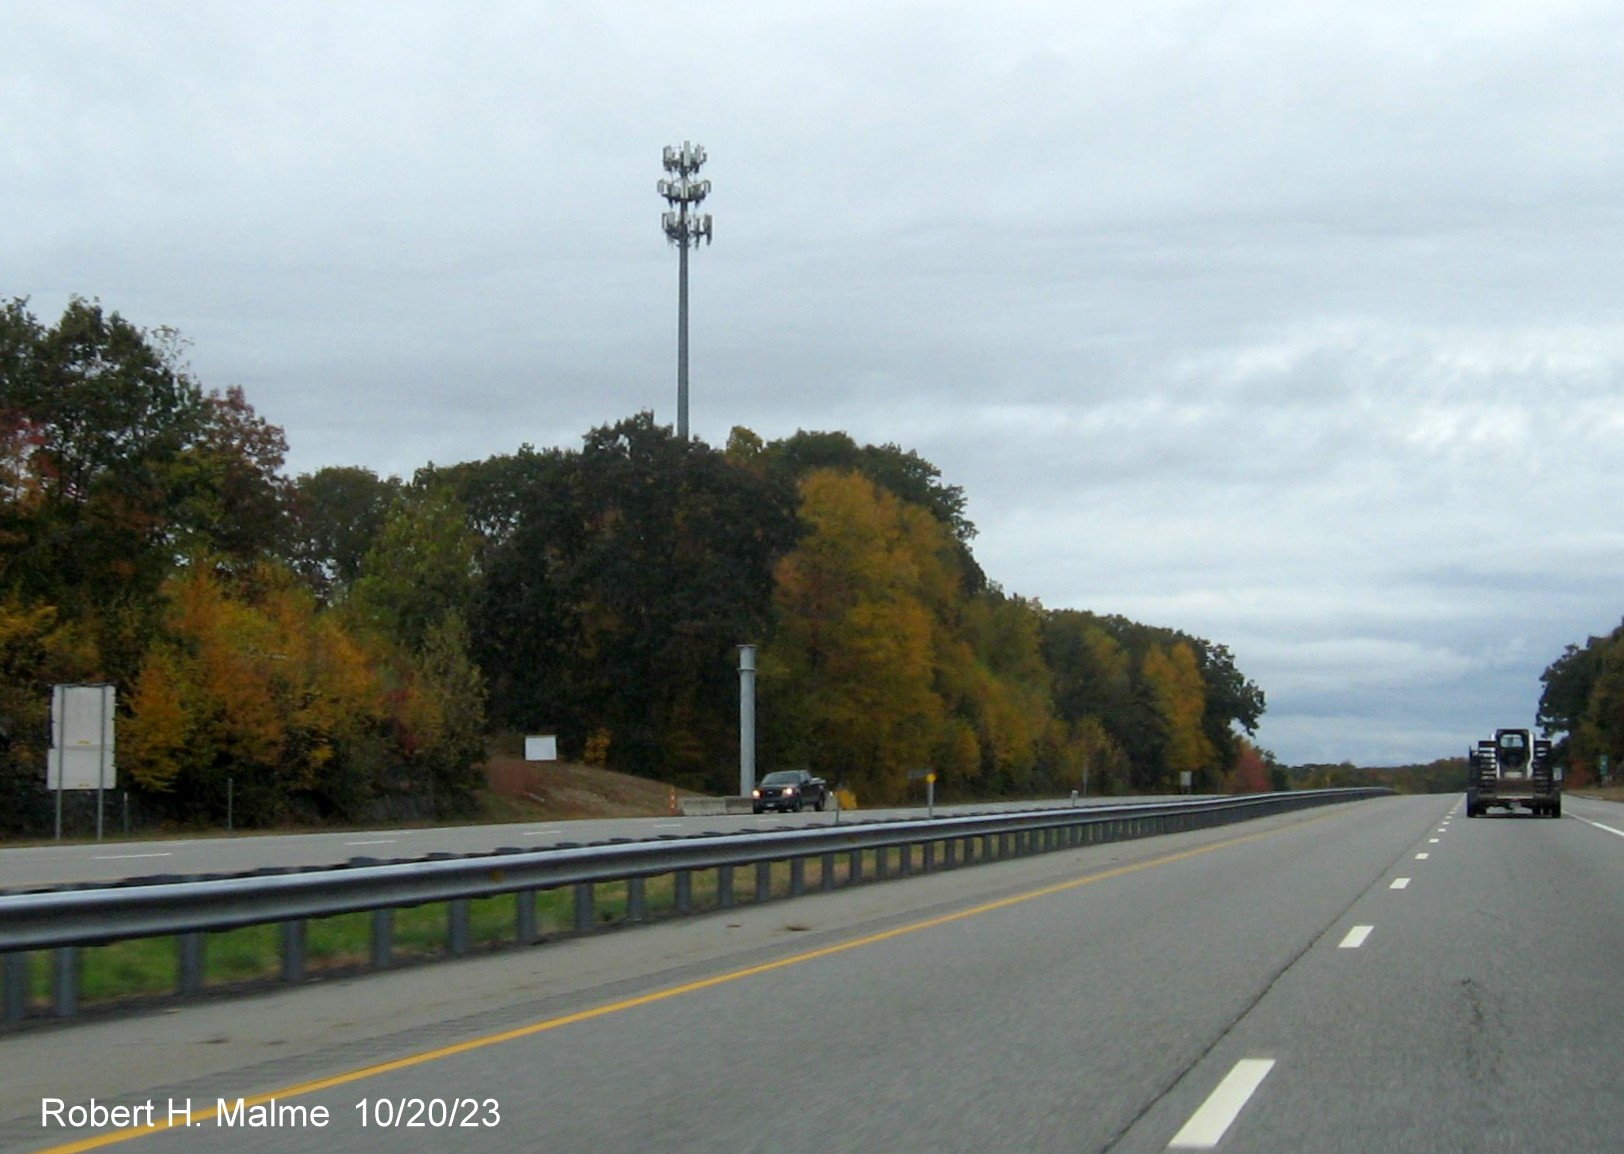 Image of recently placed support for future advance sign for CT 11 exit on CT 2 East, as seen from westbound lanes, October 2023